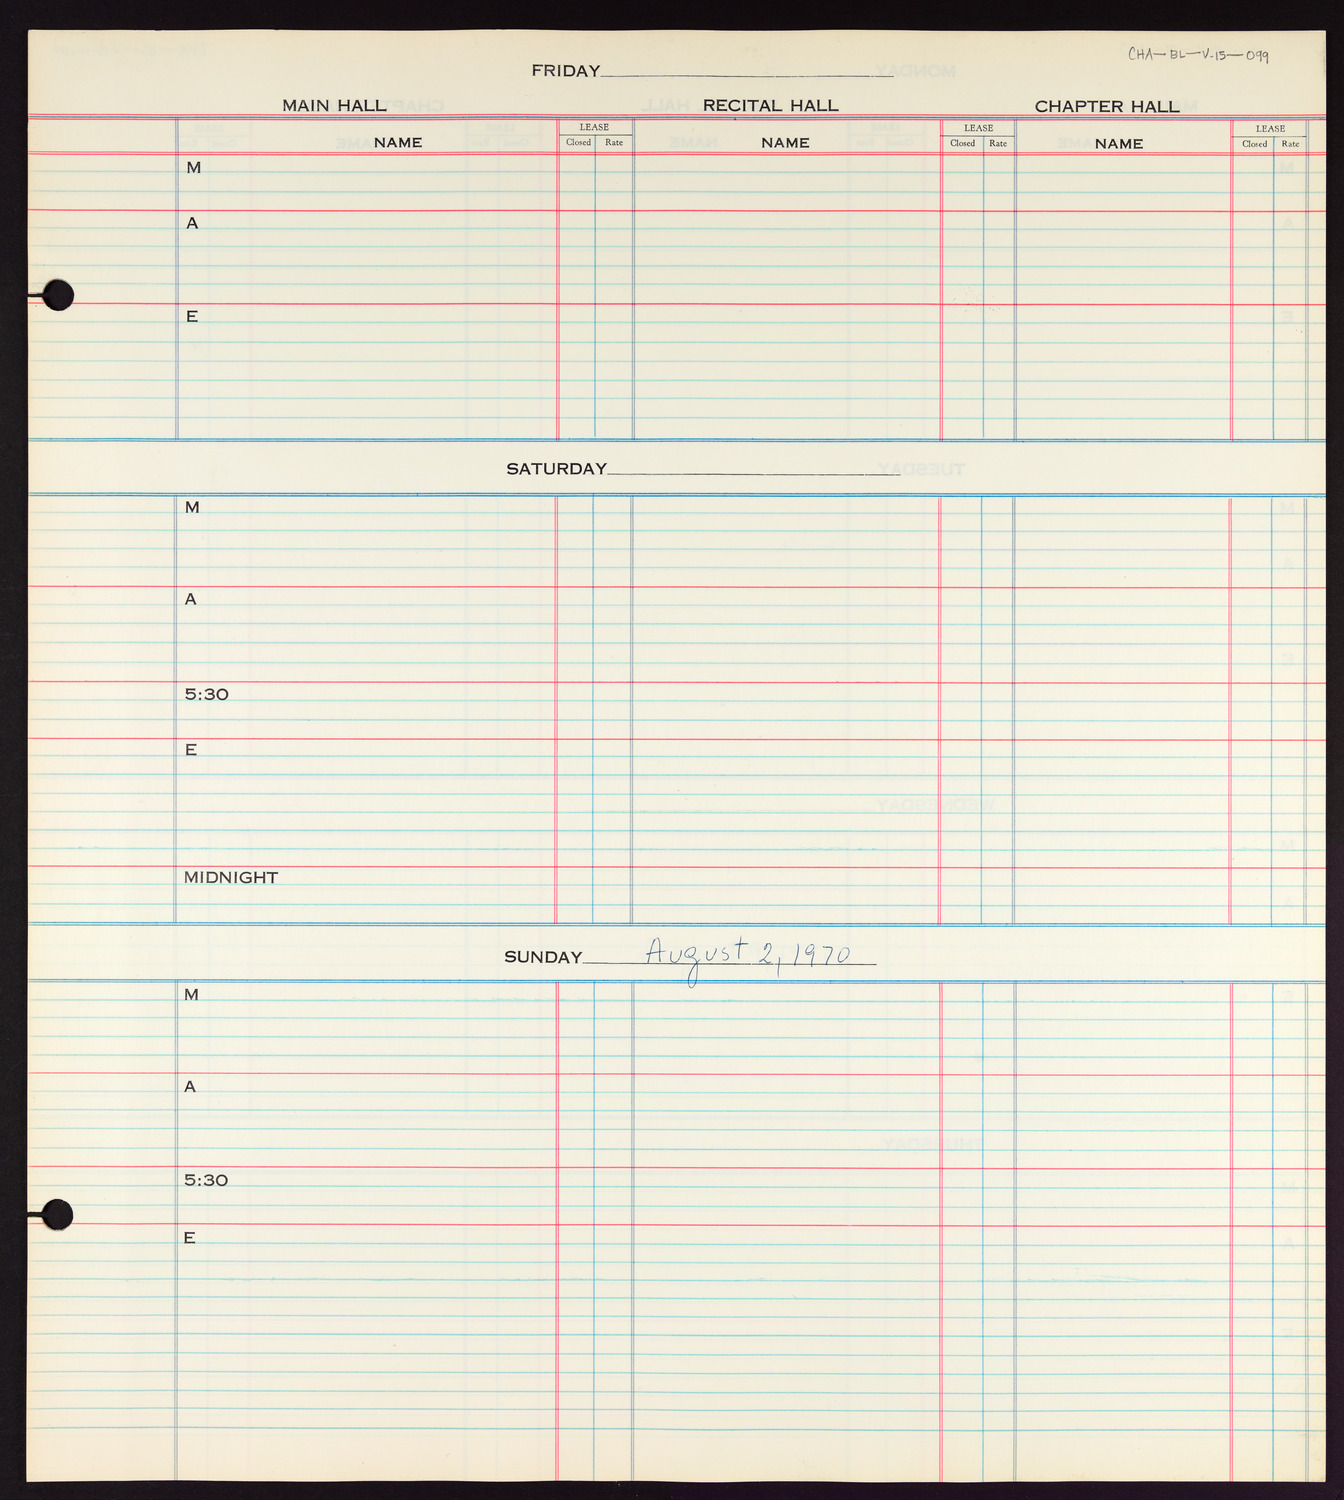 Carnegie Hall Booking Ledger, volume 15, page 99